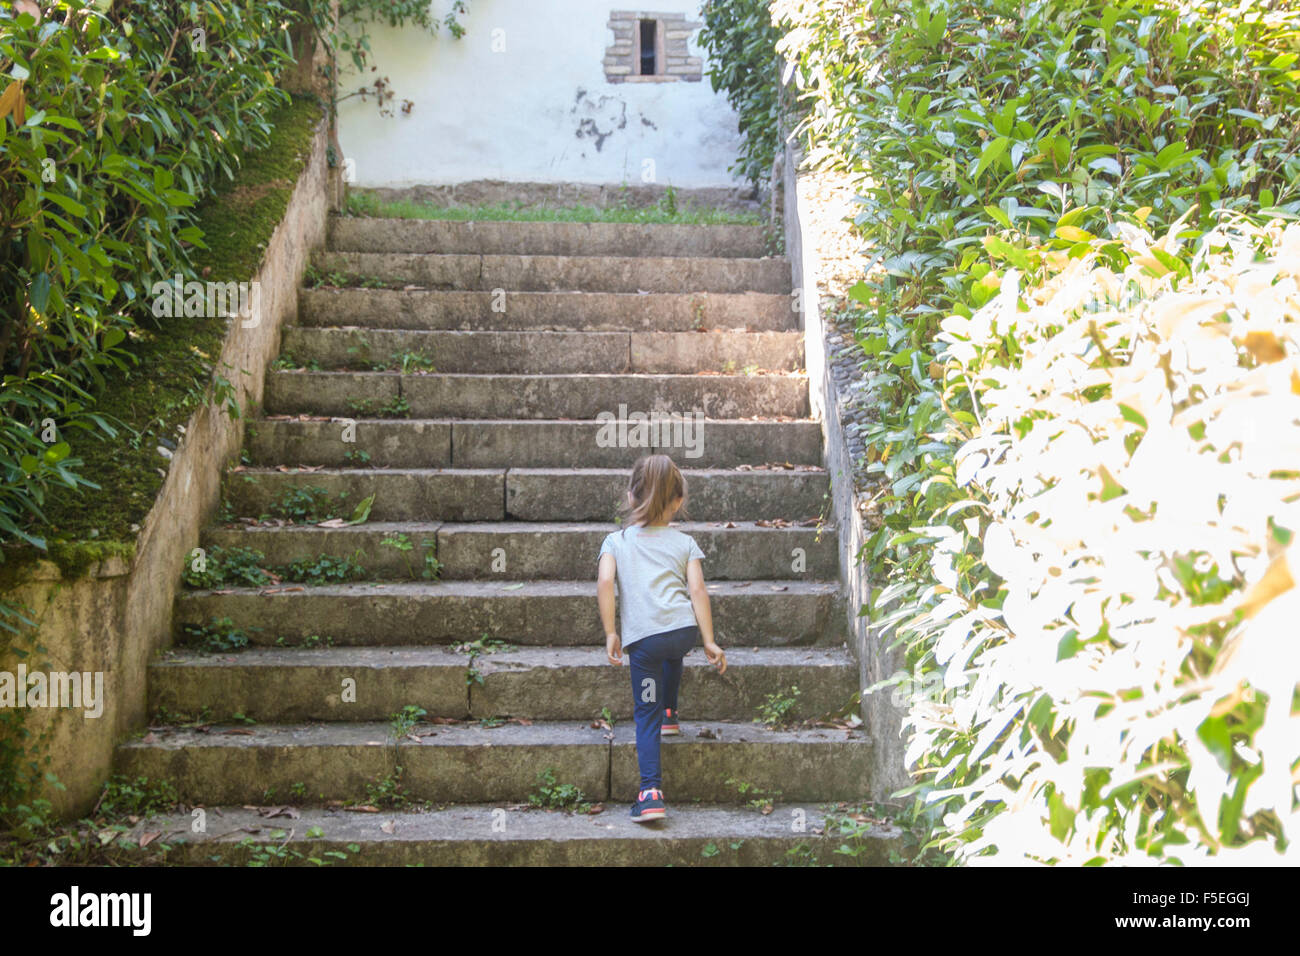 Rear view of girl walking up steps Stock Photo